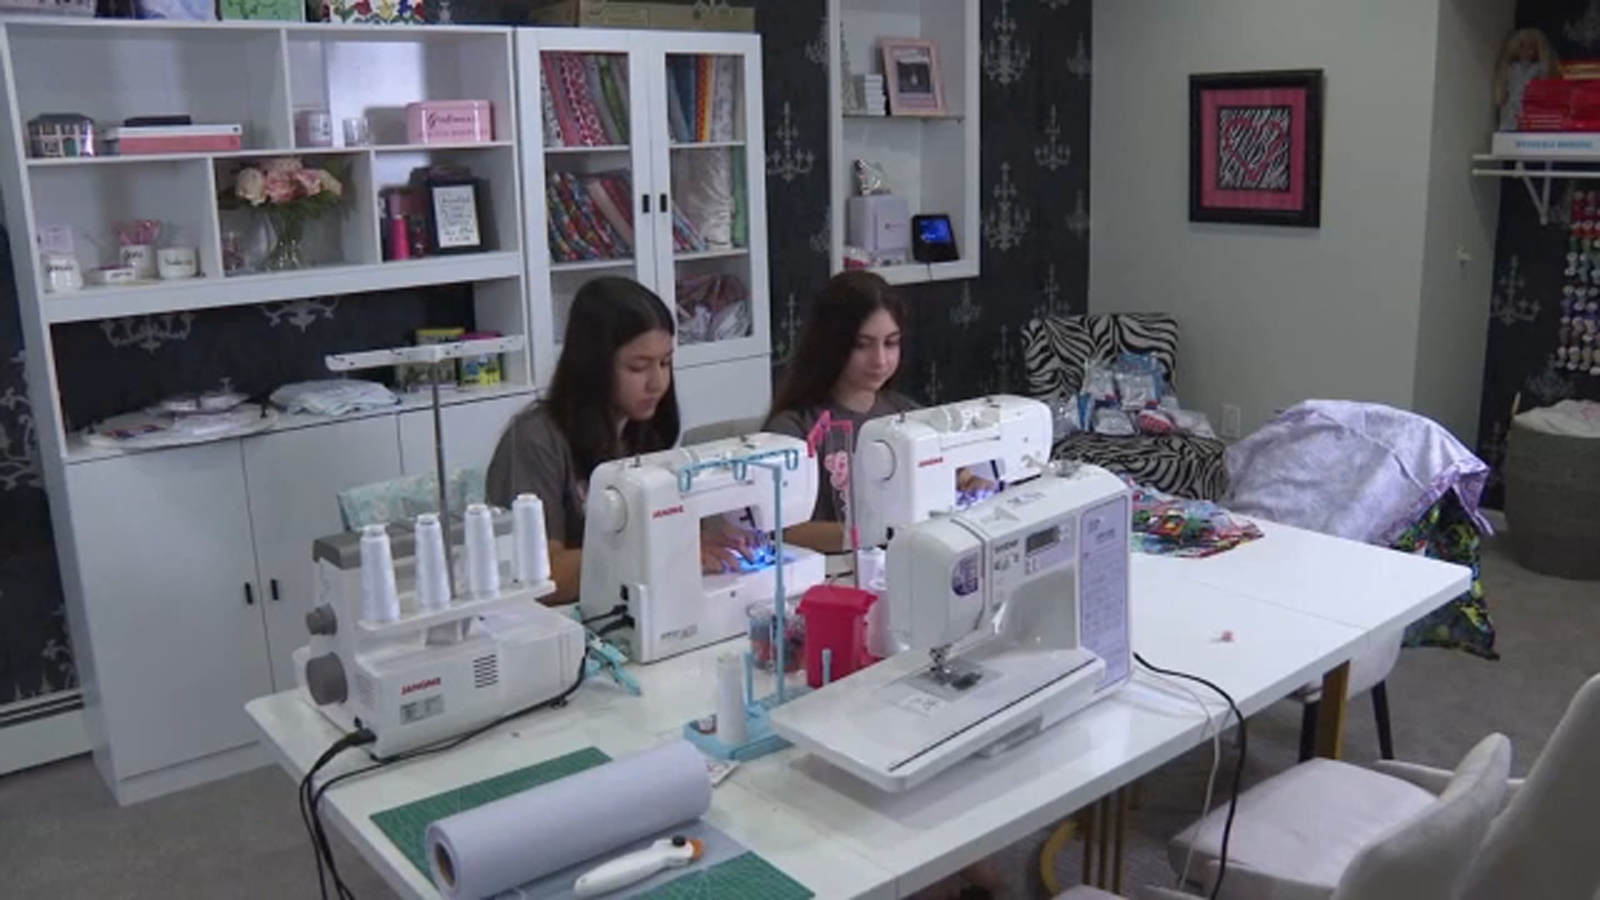 Sewing sisters kids hospital gowns: Inspired by baby cousin with cancer, New Jersey girls bring cheer to drab garment [Video]